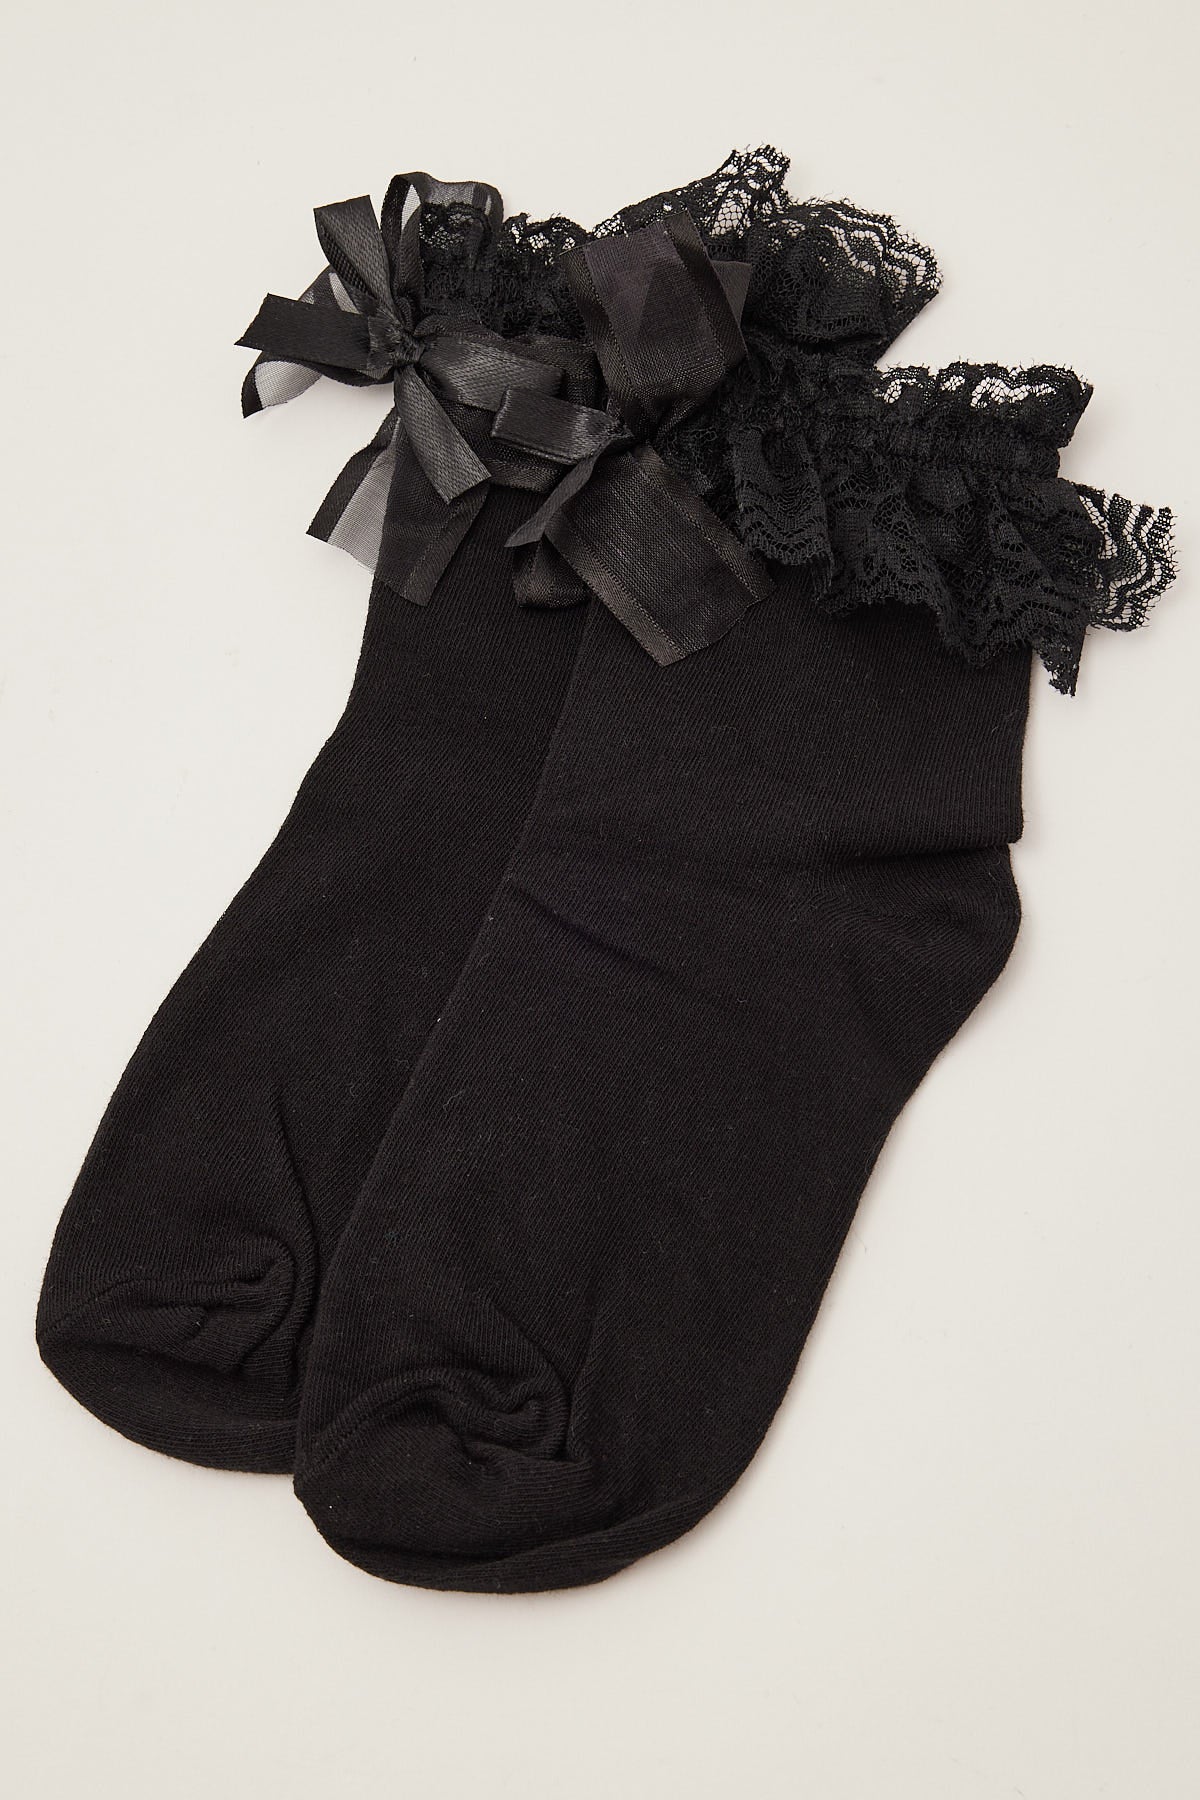 Token Lace Frill Bow Sock Black